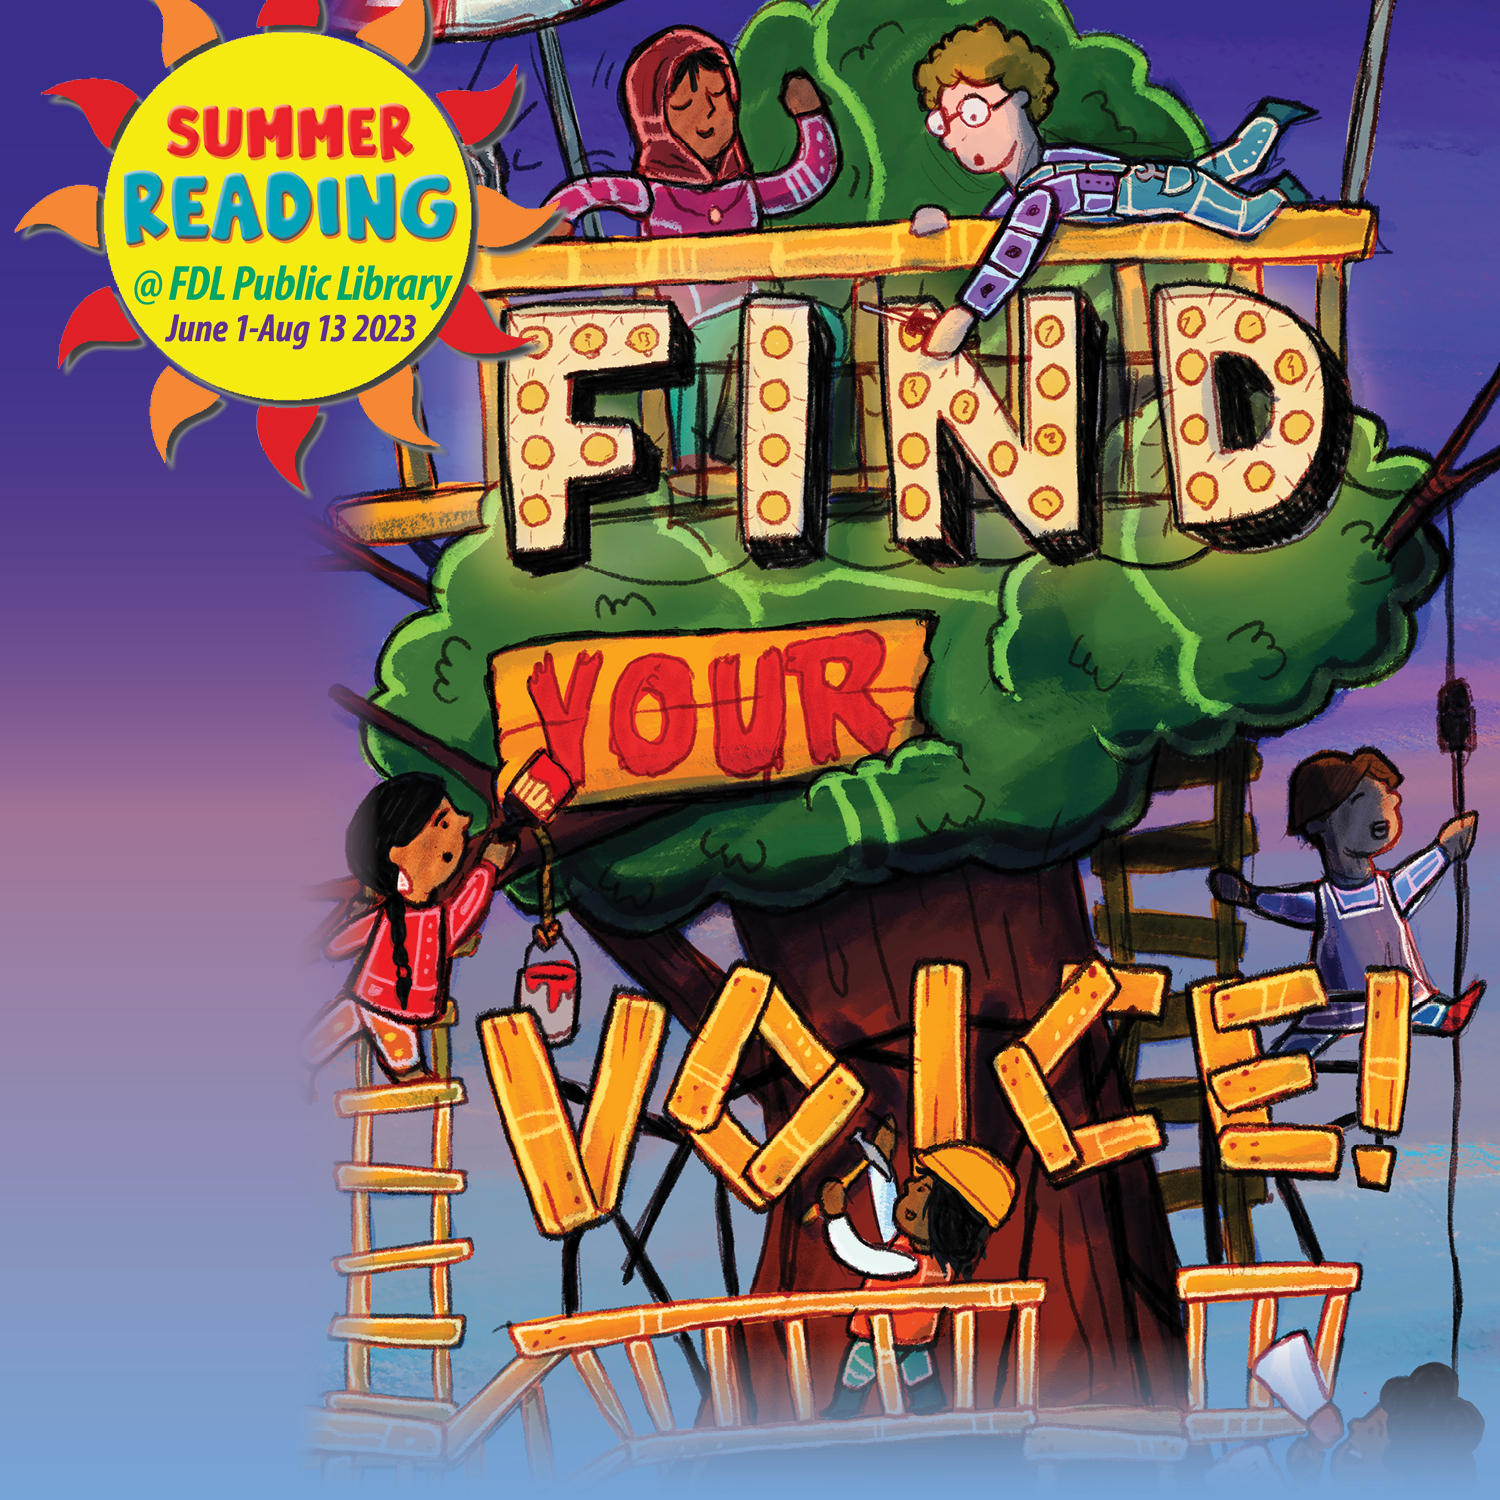 Find Your Voice with the FDL Public Library as Summer Reading begins